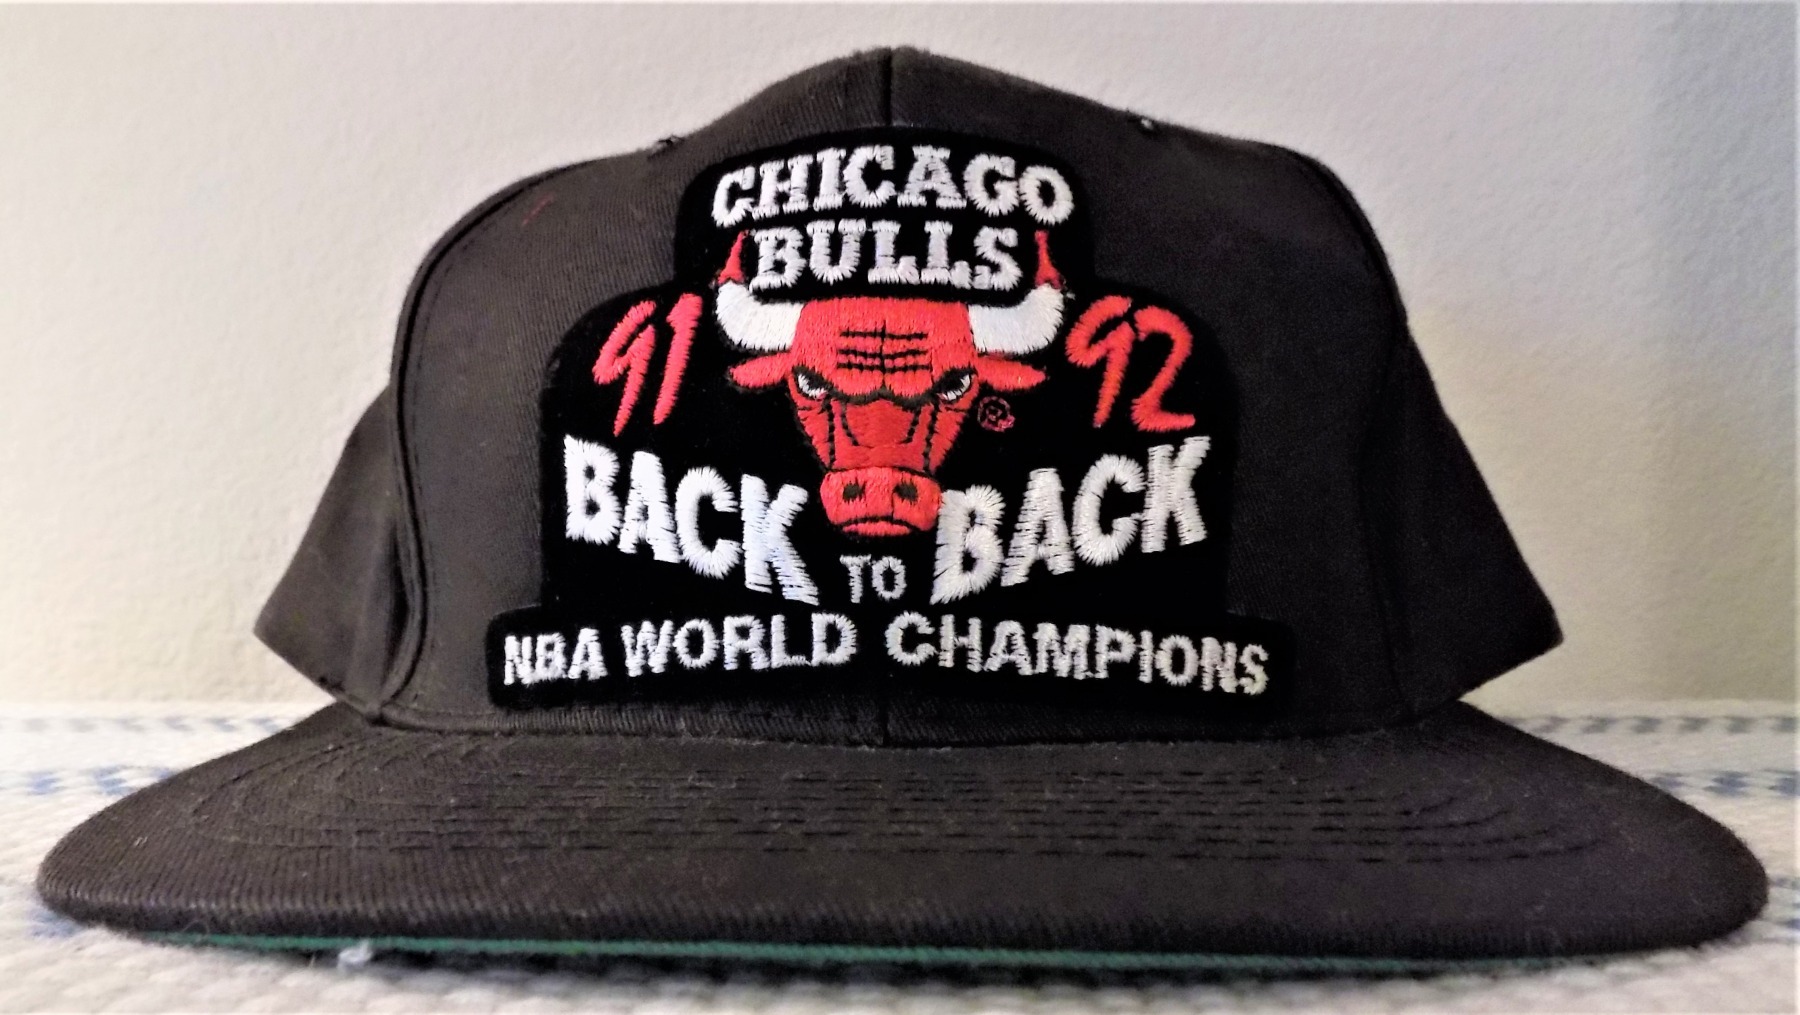 Vintage NBA Chicago Bulls World Champions Back to Back to Back 91 92 93  hat/cap